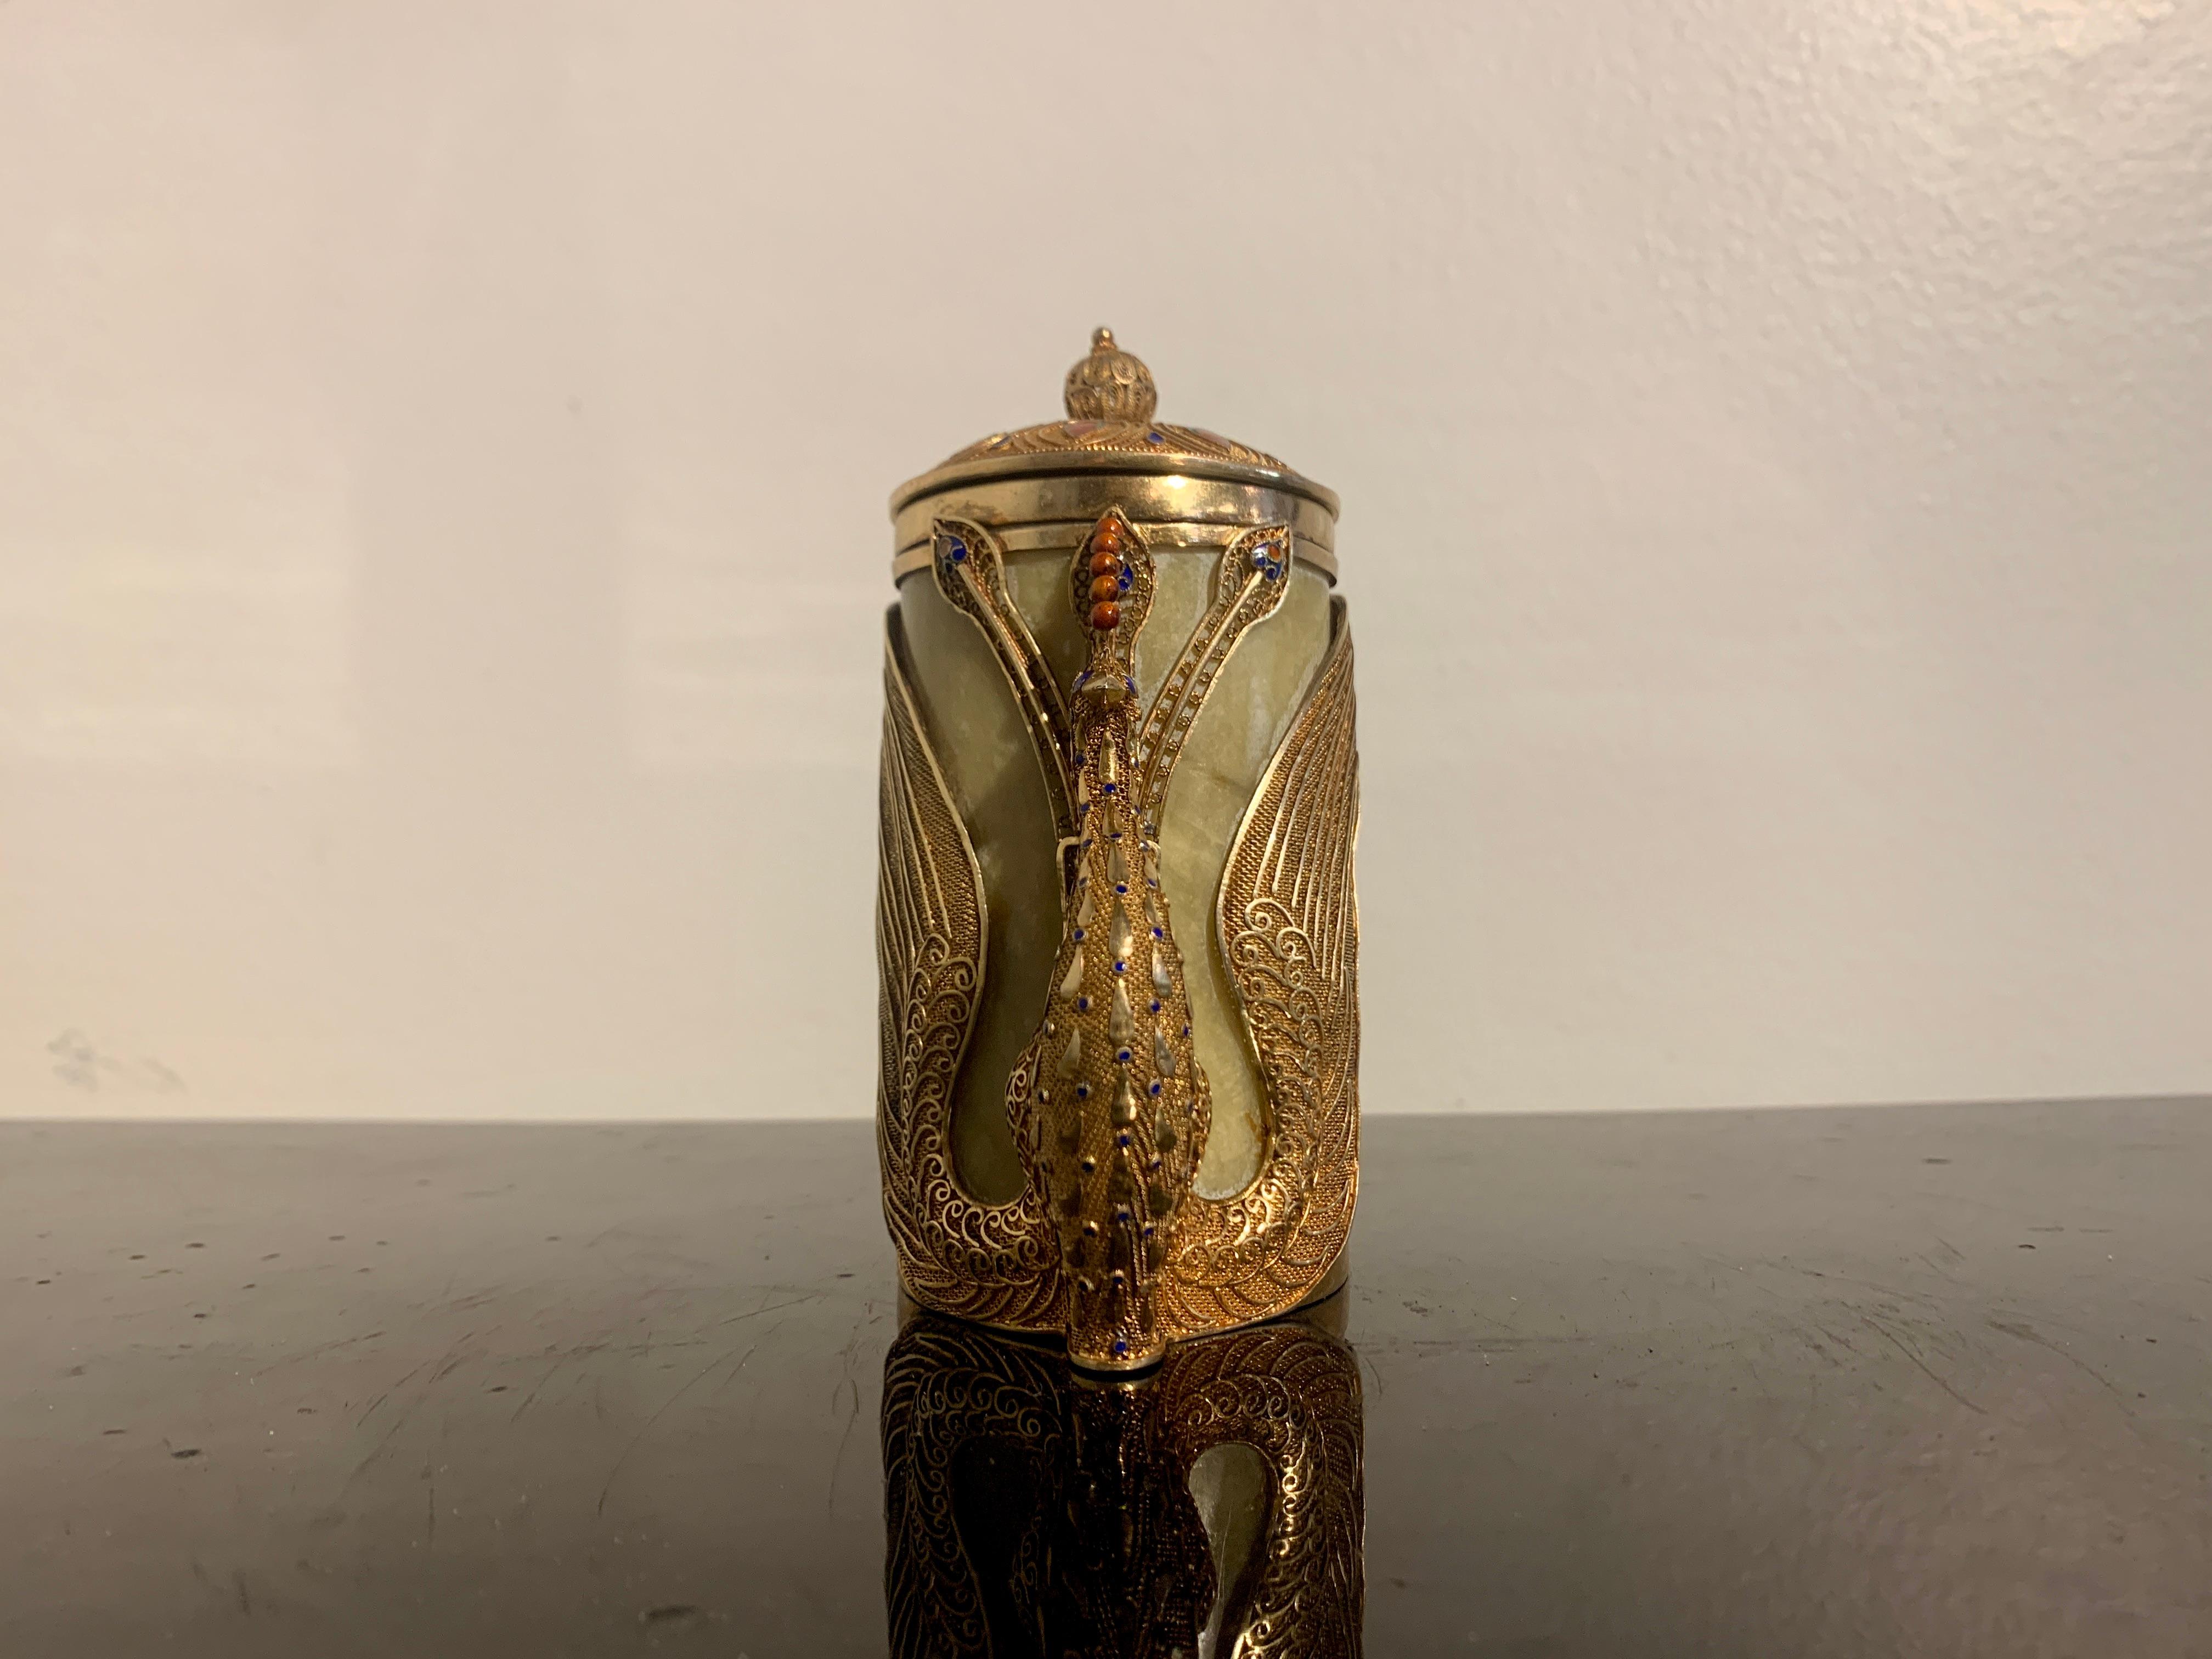 An exquisite Chinese export peacock from hardstone and gilt silver filigree canister box, Republic Period, circa 1920's, China. 

The graceful and elegant hardstone container of cylindrical canister form mounted with gilt silver filigree and enamel